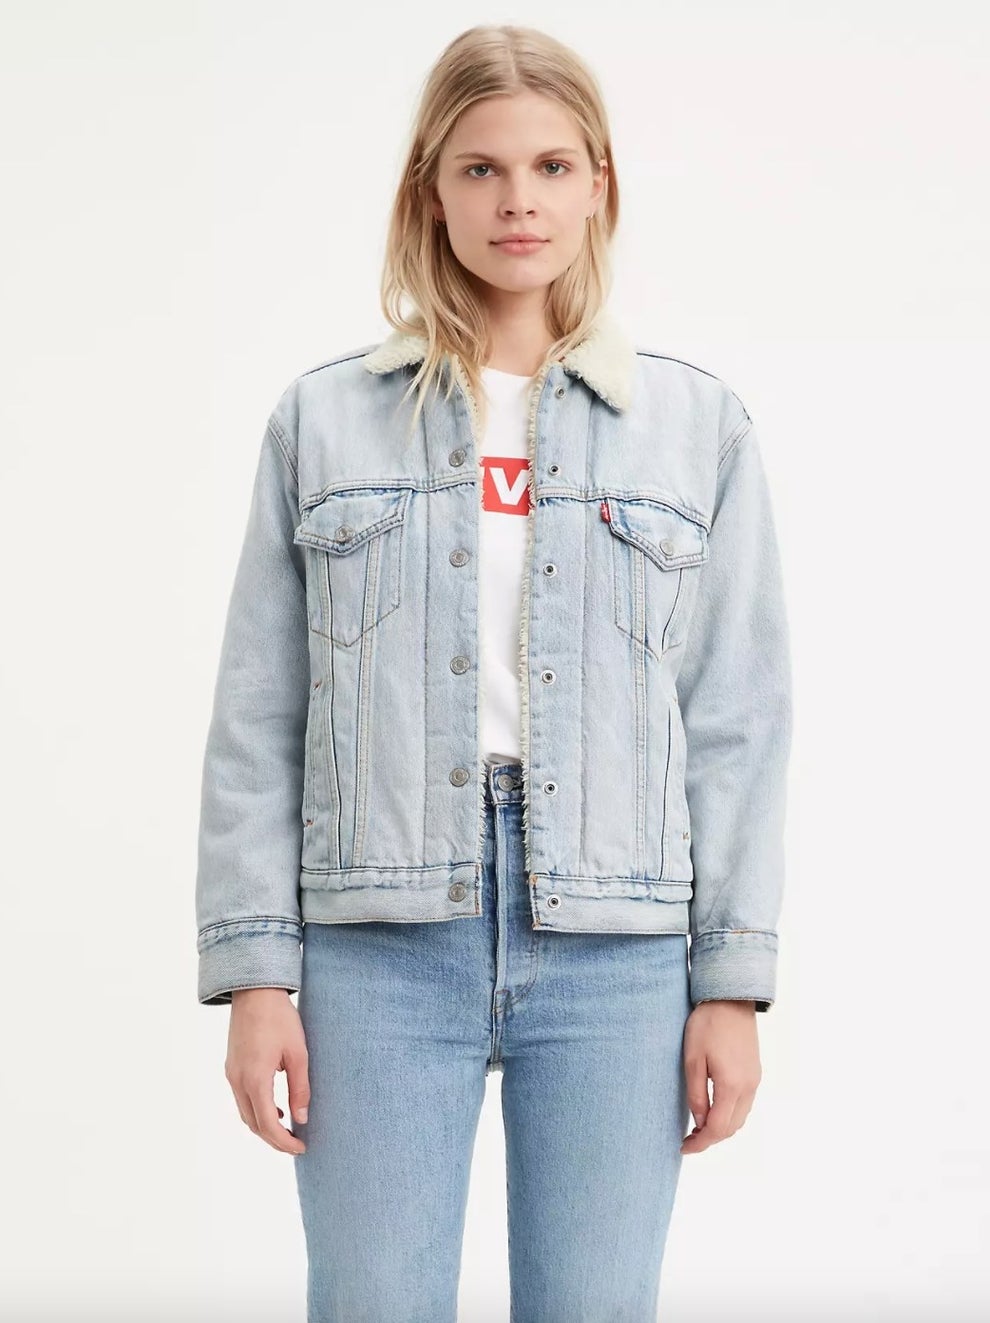 Levi's Warehouse Sale Is Up To 75% Off